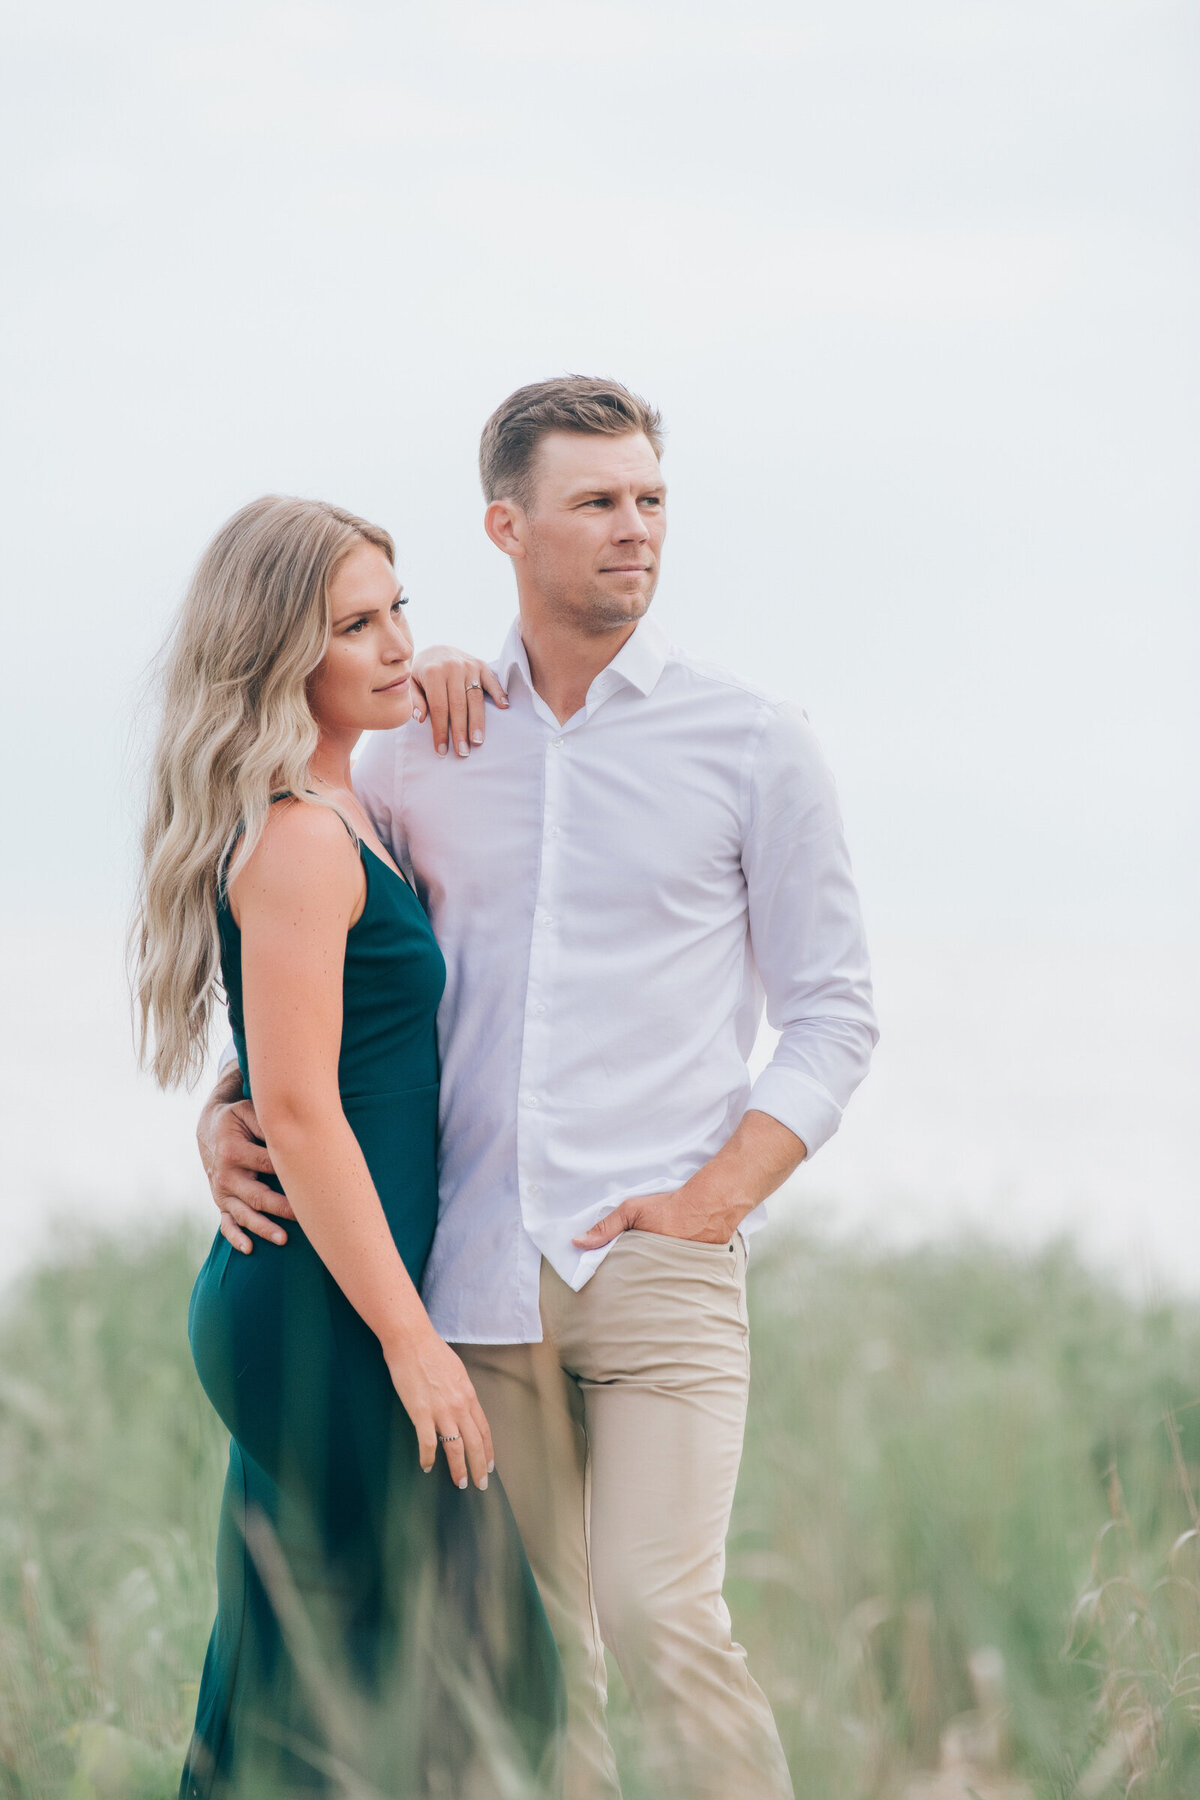 Couple posing on the beach for their summer engagement session